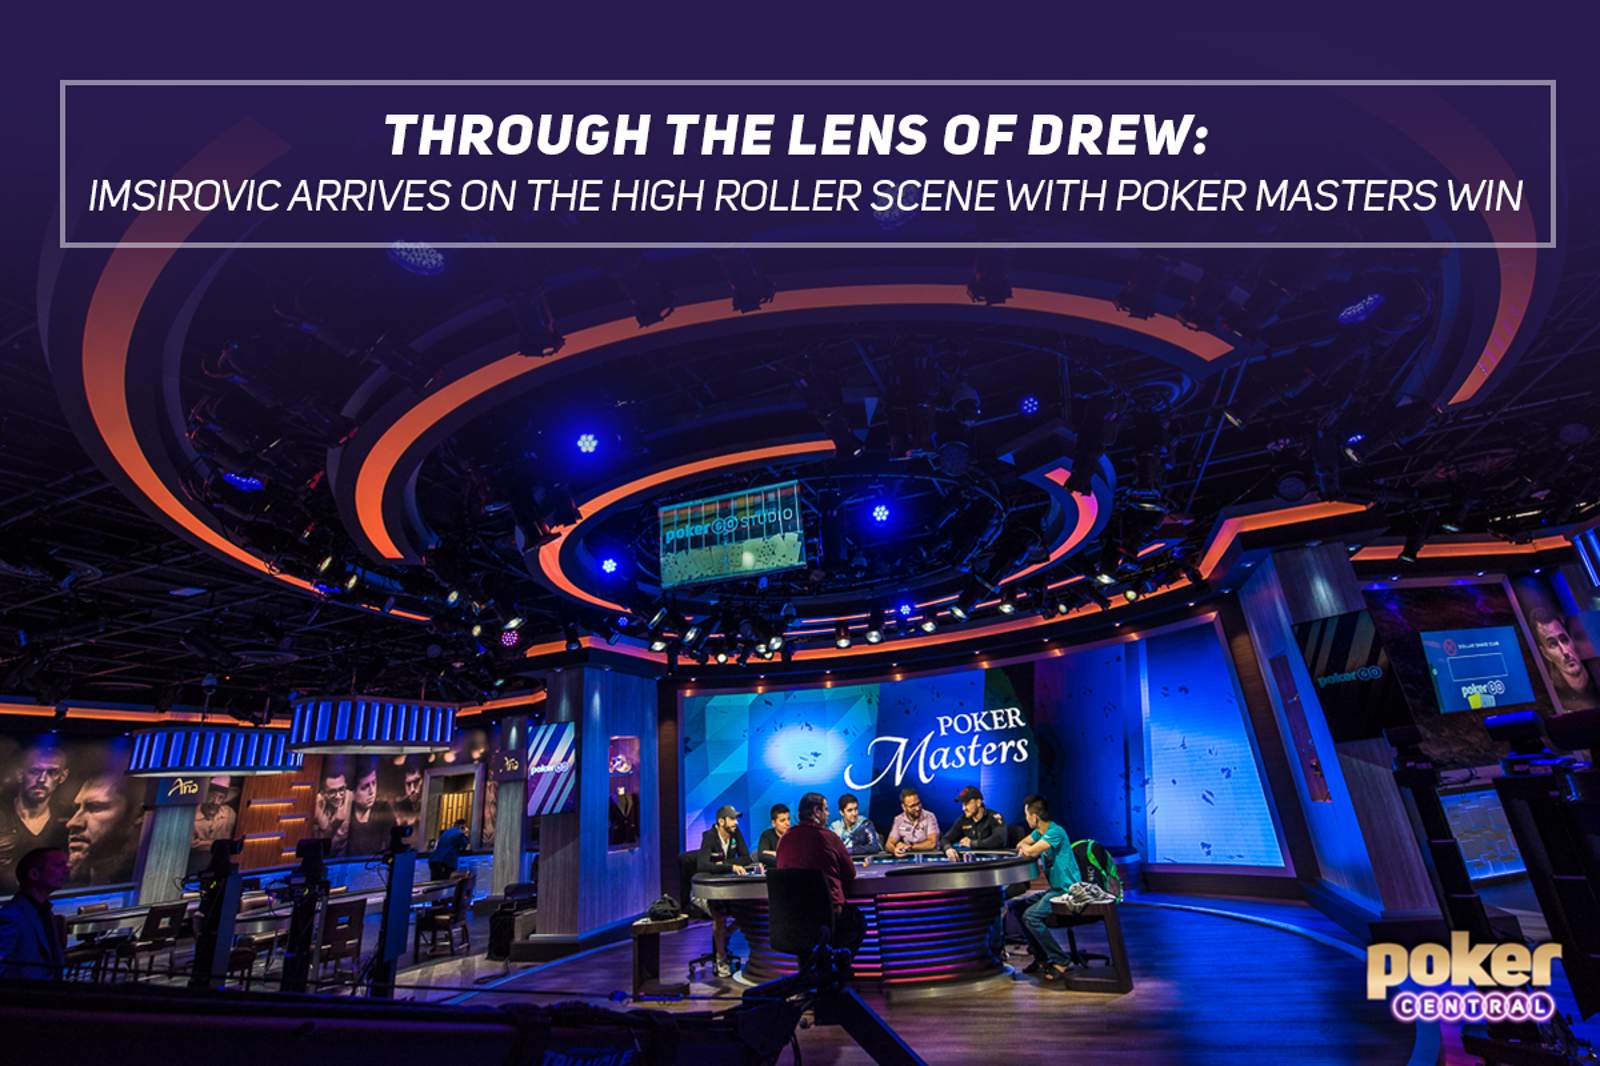 Through the Lens of Drew - Imsirovic Arrives on the High Roller Scene with Poker Masters Win